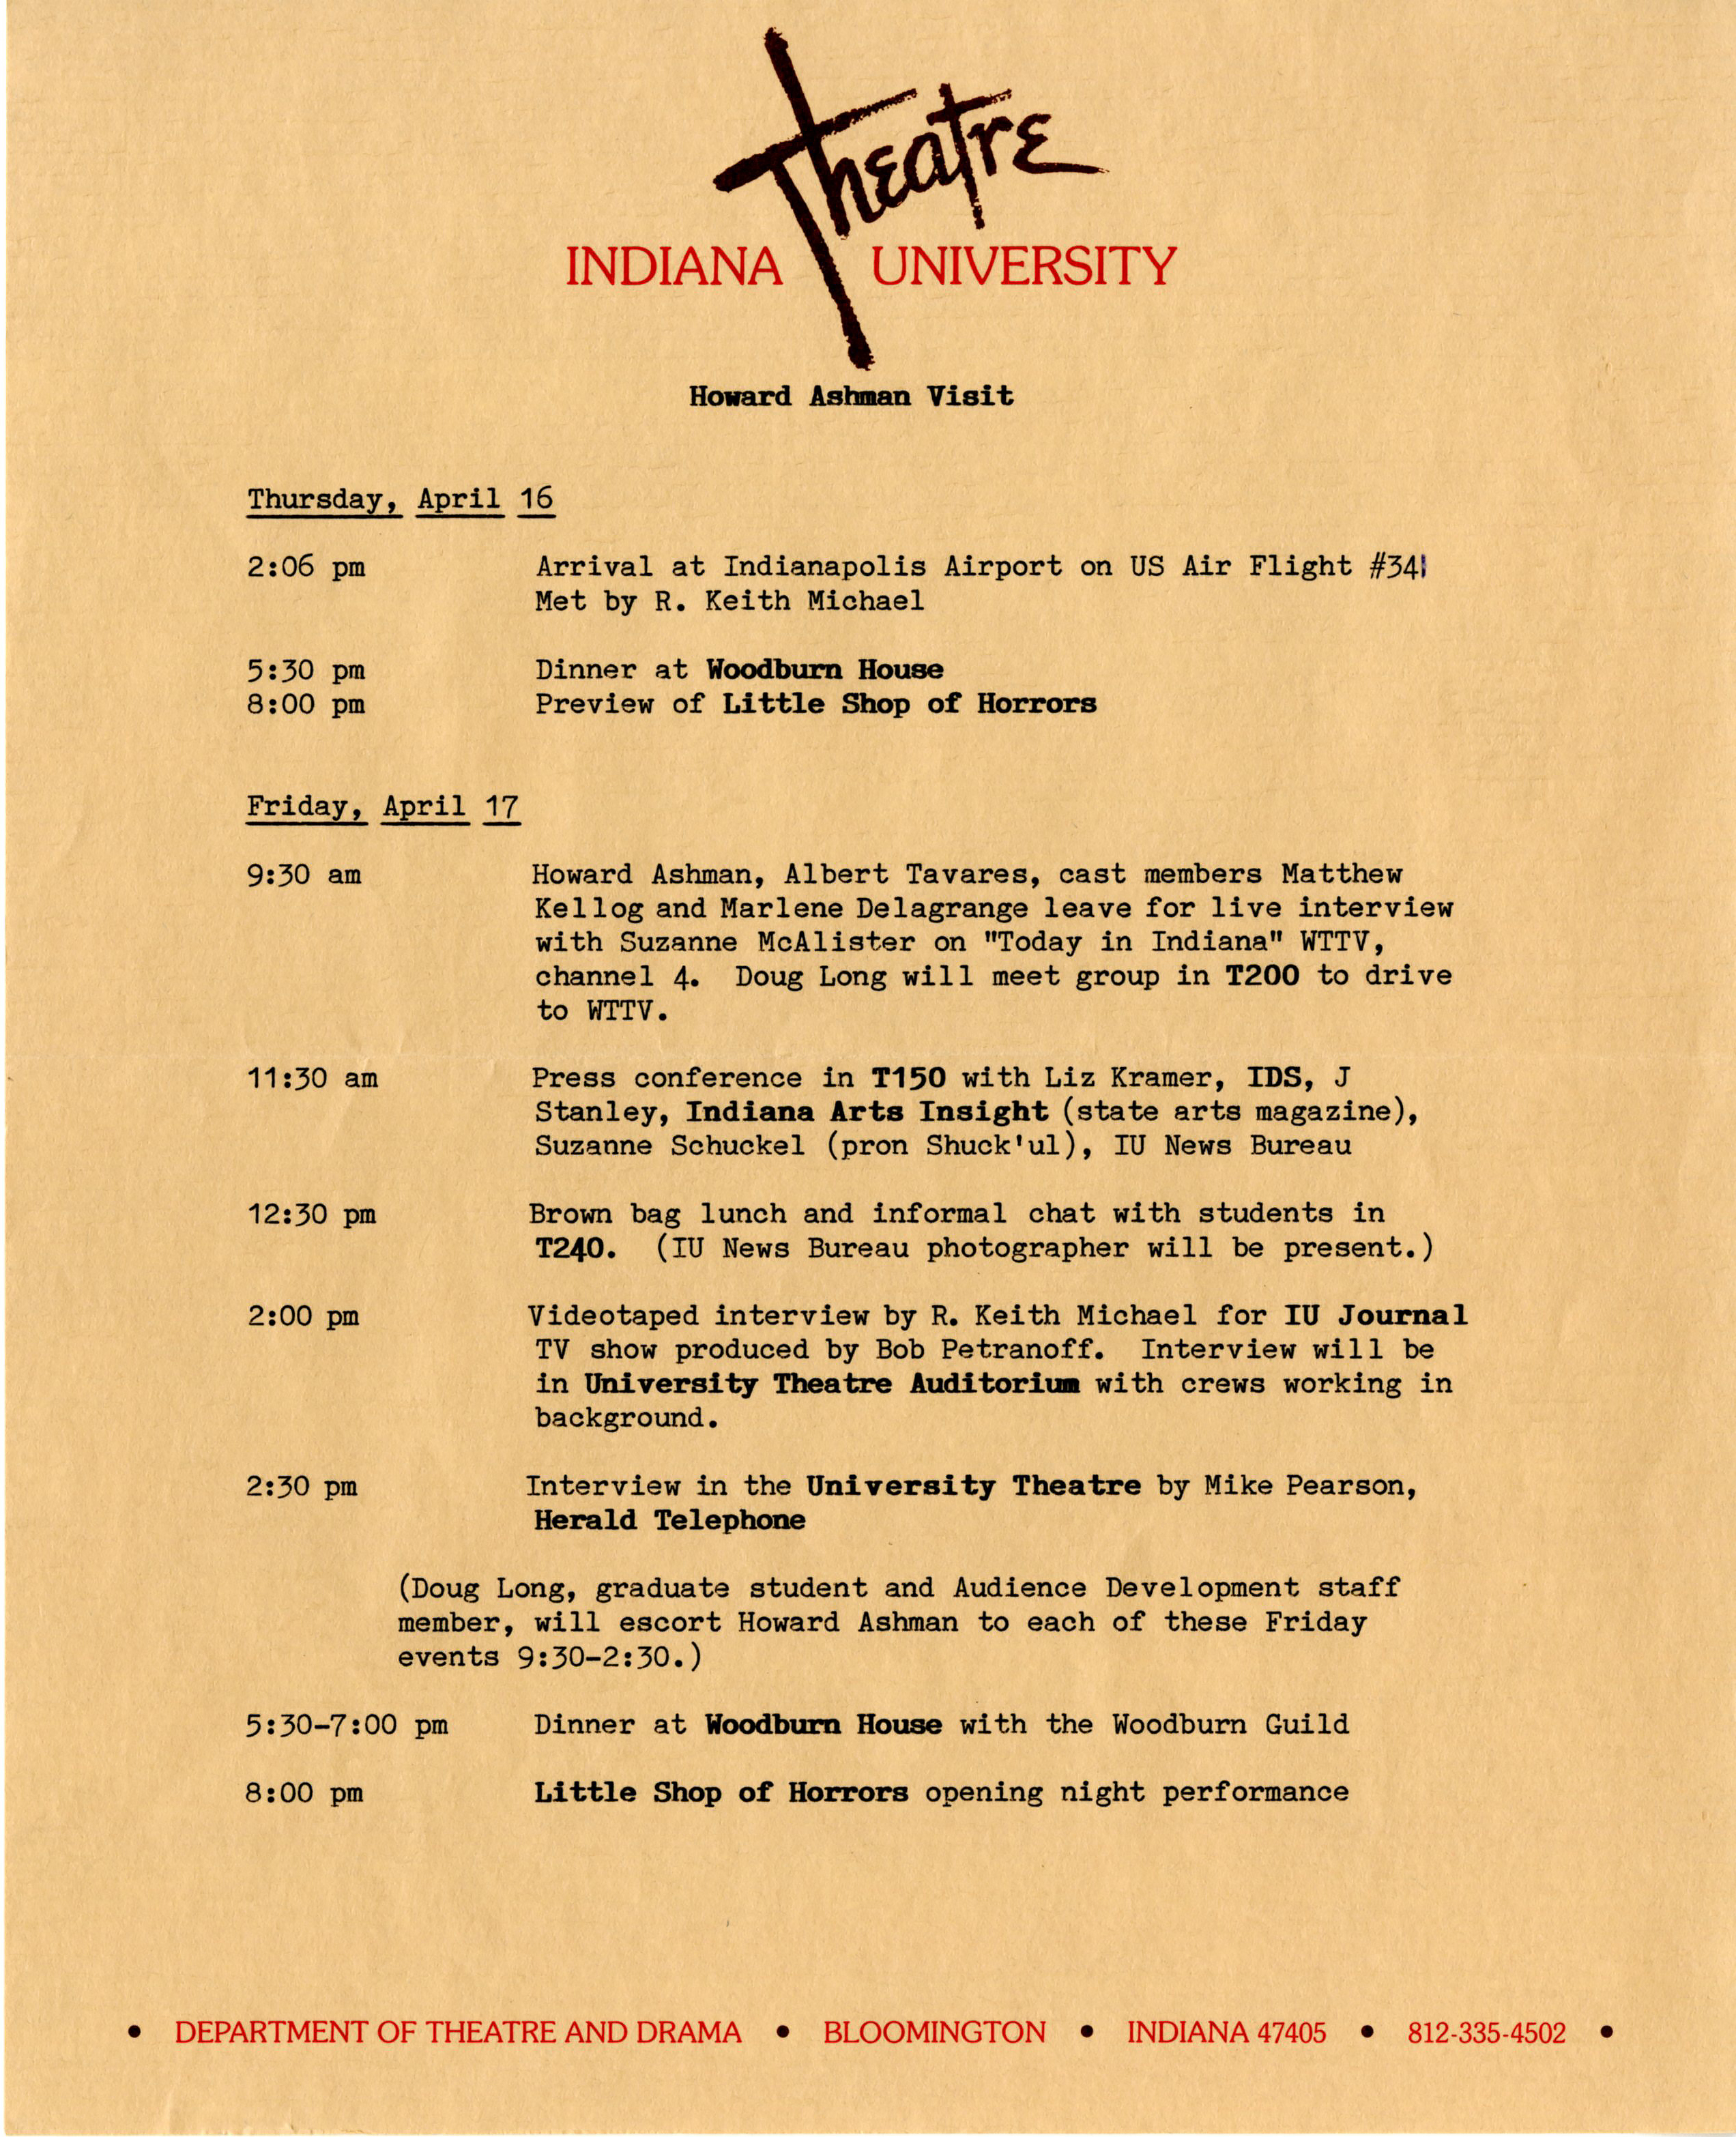 Scanned image of a typed letter on IU Theatre letterhead